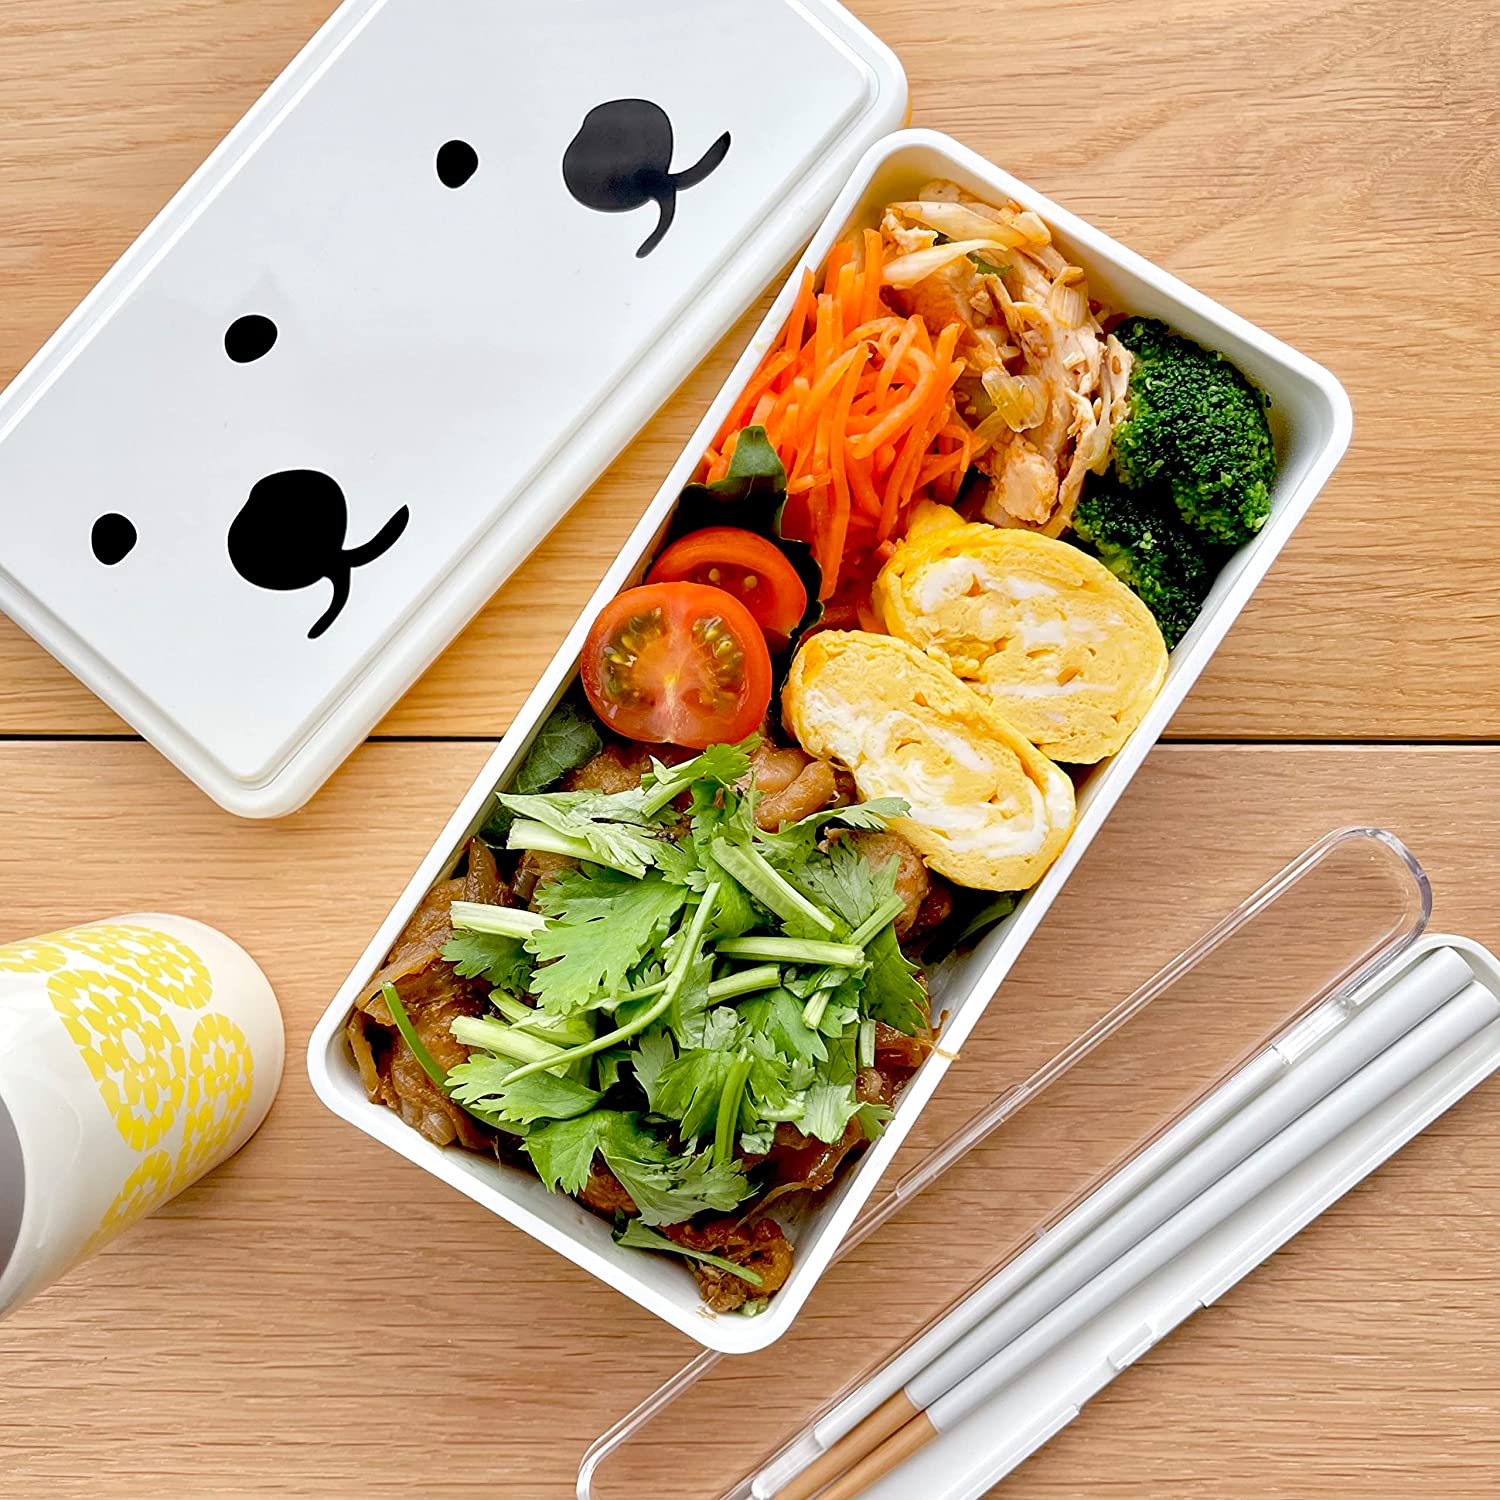 Bento Lunch Cold Gel Pack Long Slim Shape - Panda for Bear and pan